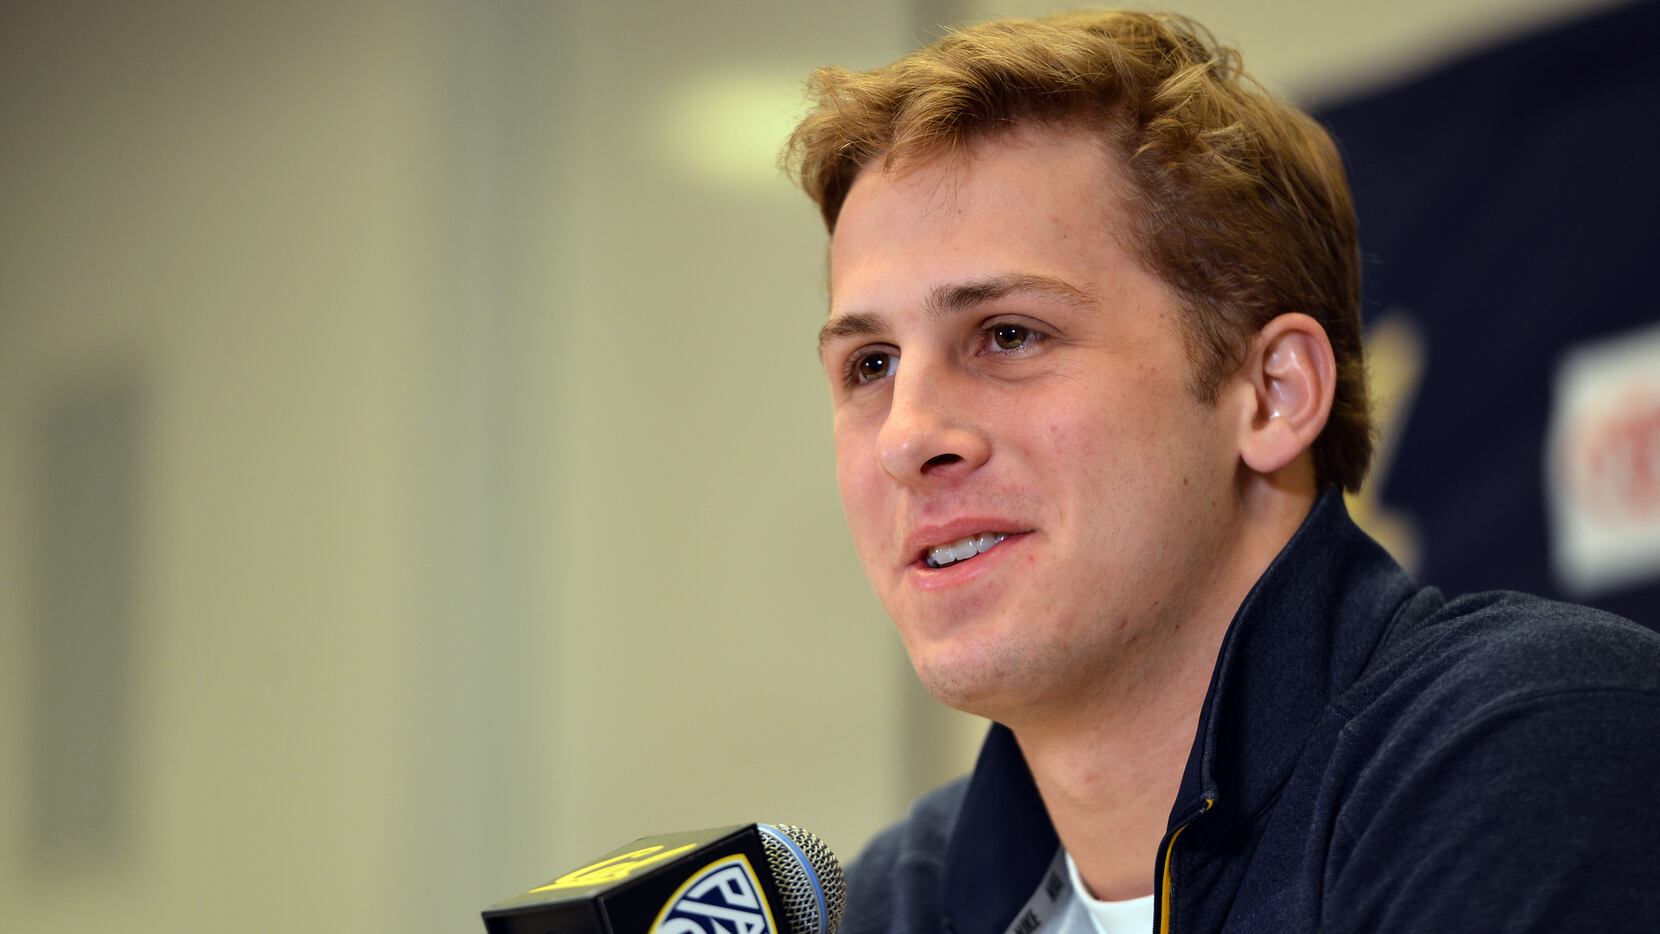 10 things to know about Cal QB Jared Goff, a potential Cowboys draft choice